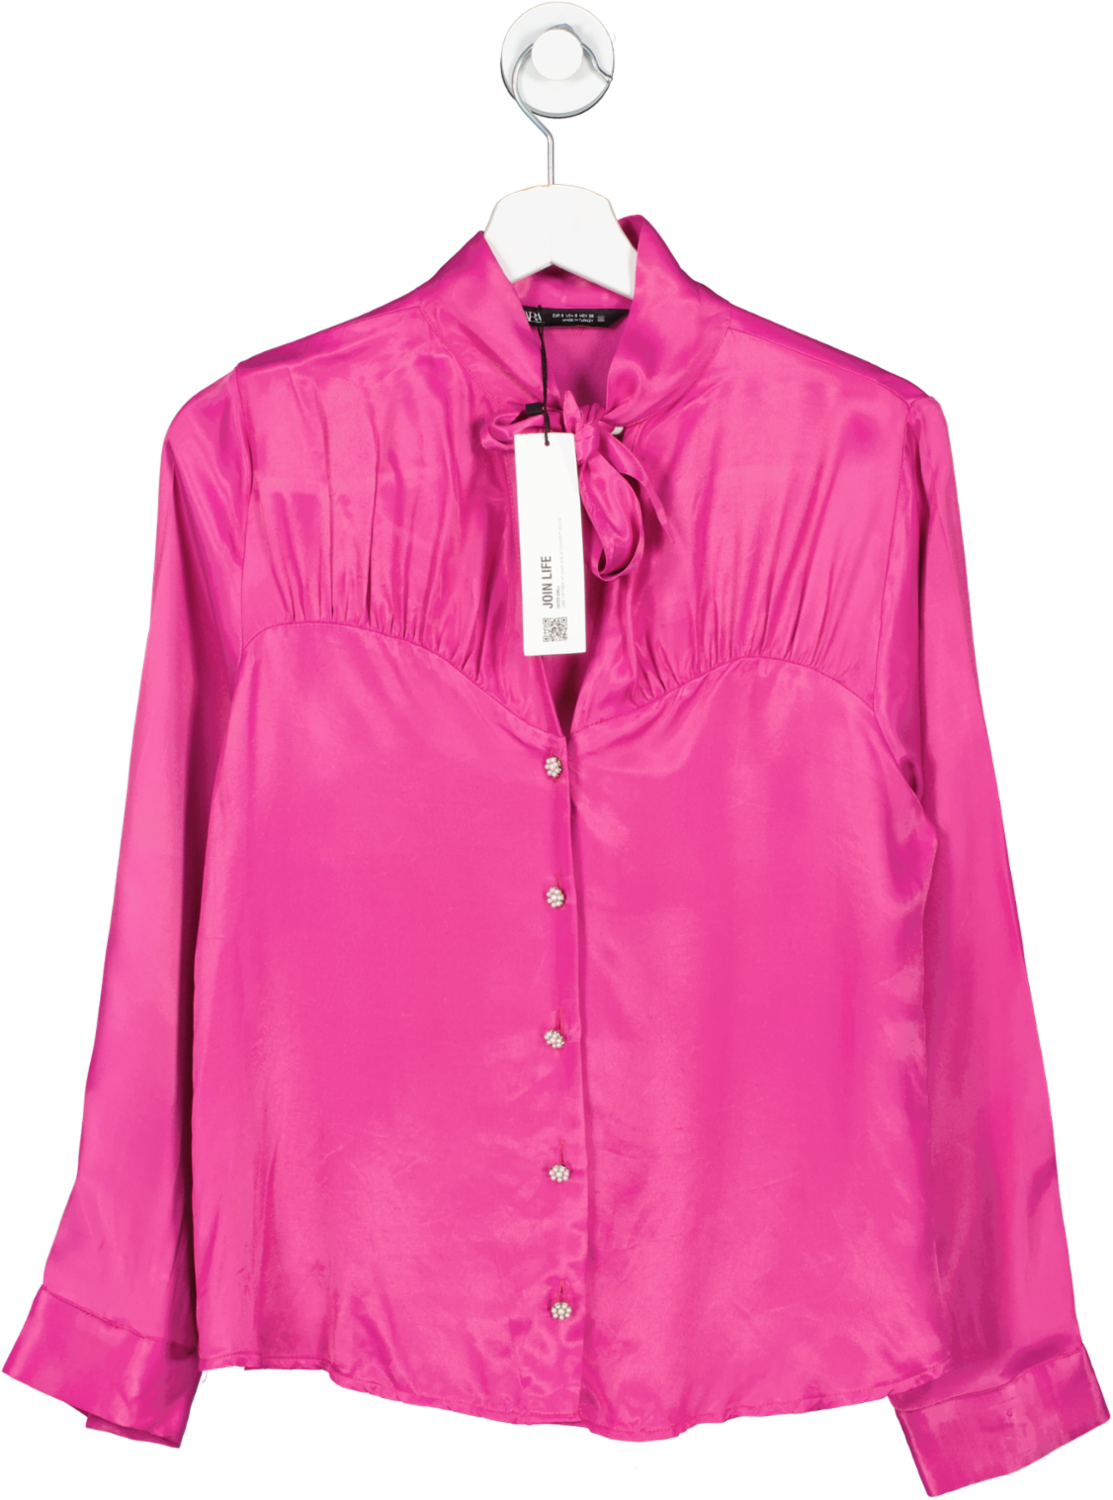 ZARA Pink Satin Blouse With Pearl Detail Buttons BNWT UK S